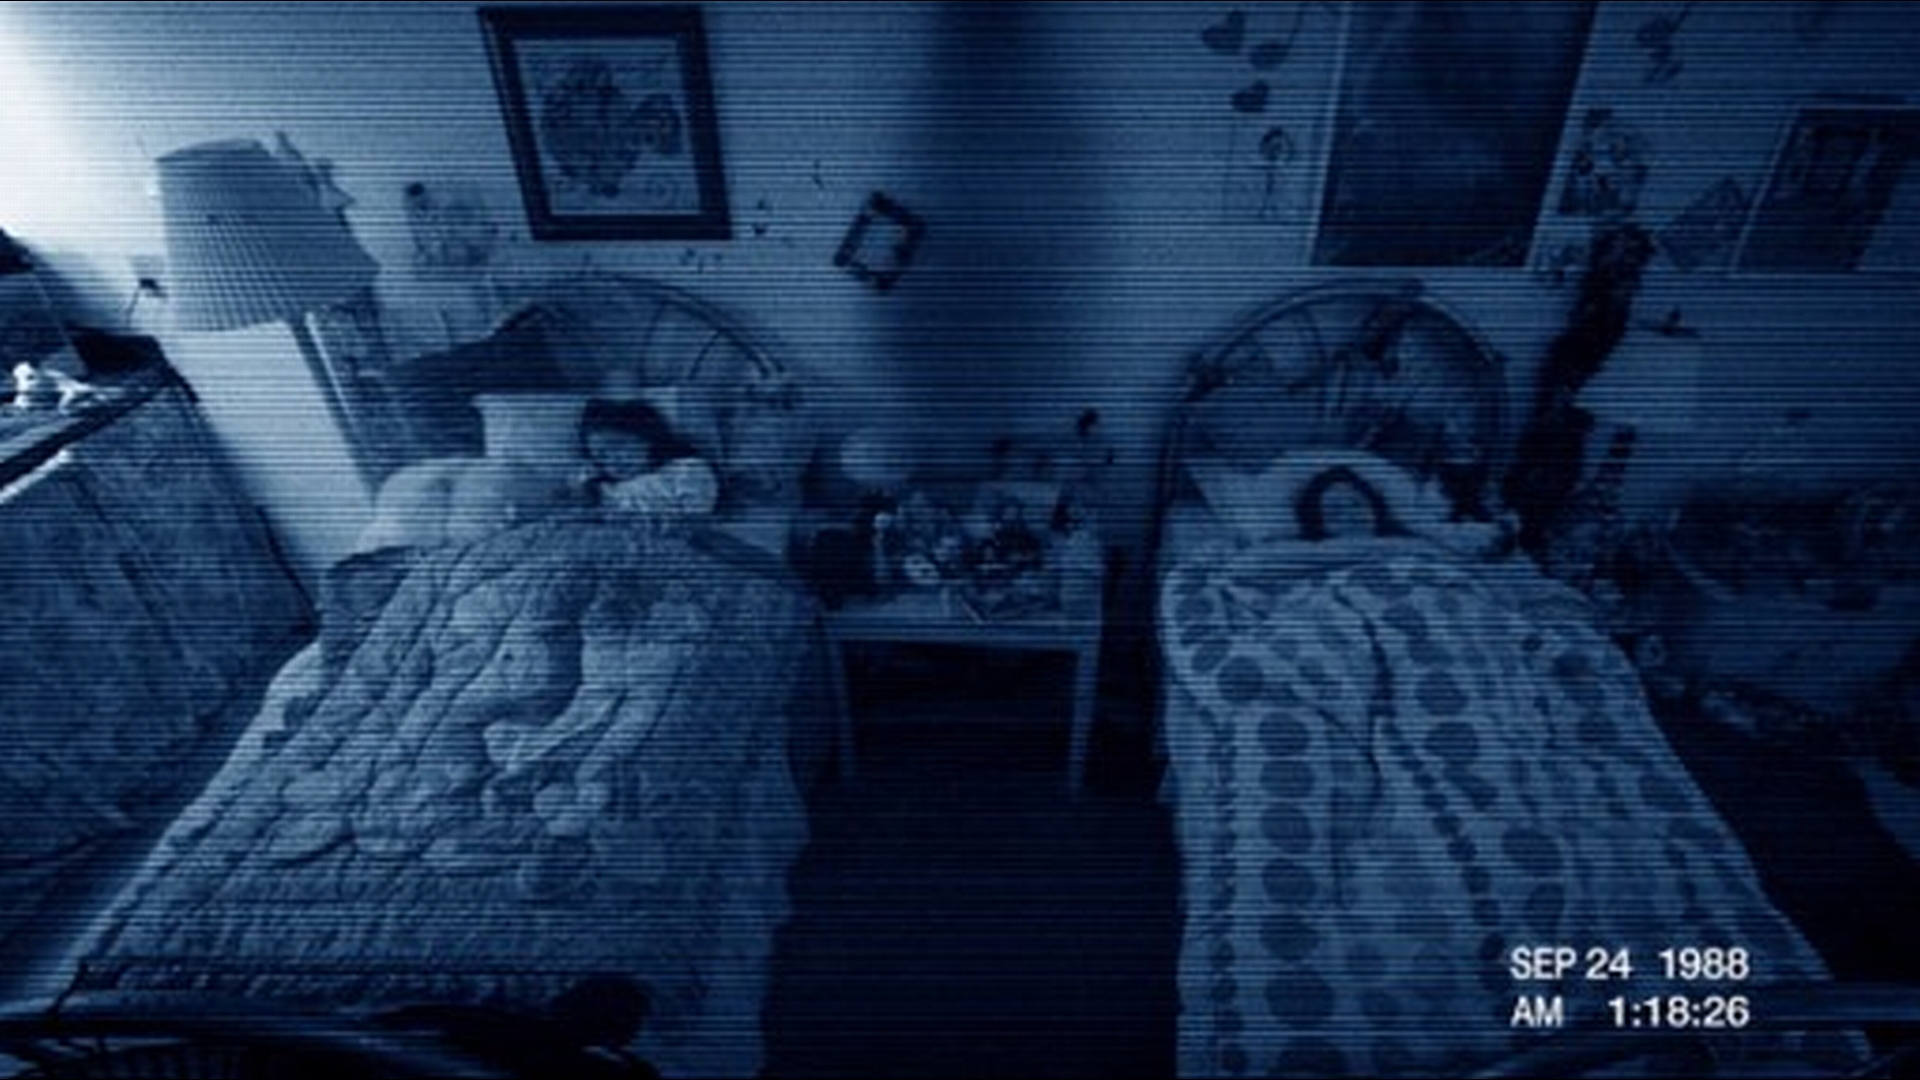 paranormal activity 2